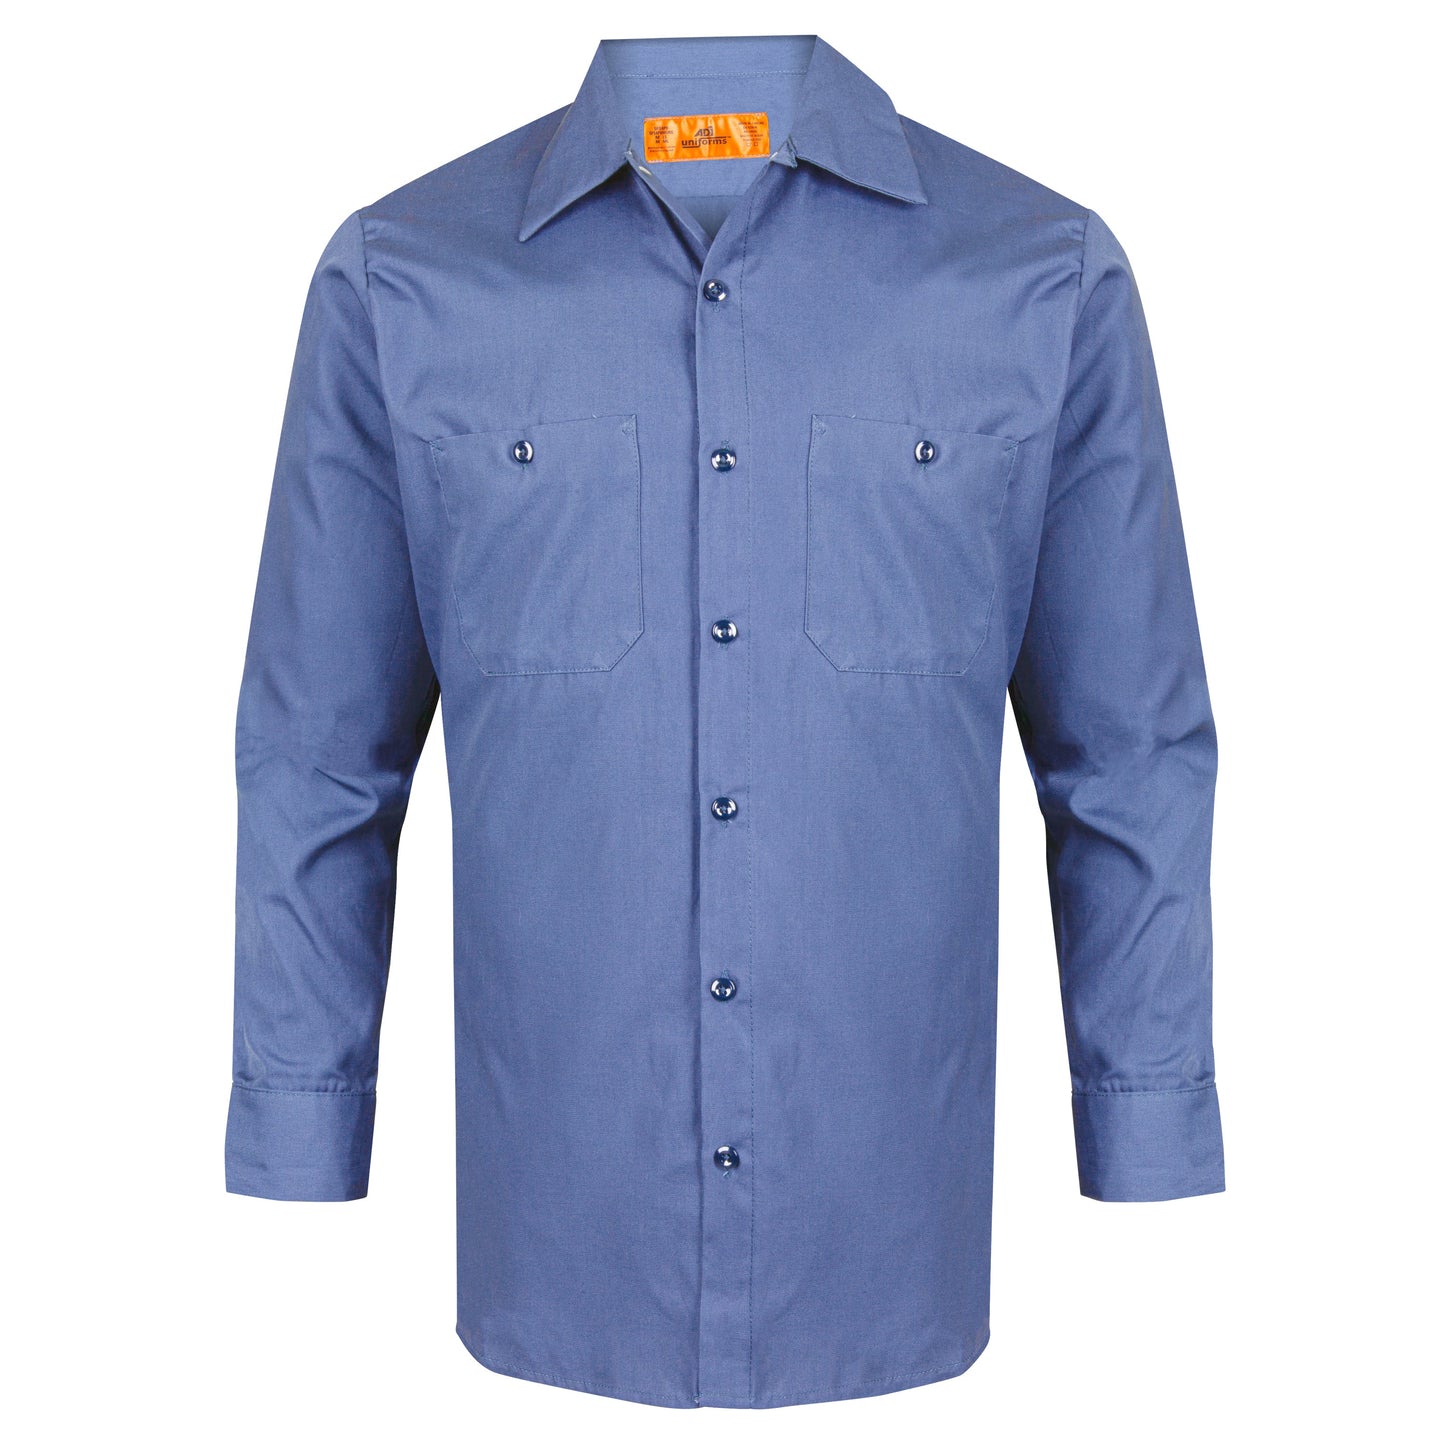 American Dawn | 2X-Large Postman Blue Work Shirt With Long Sleeves And 2 Pockets